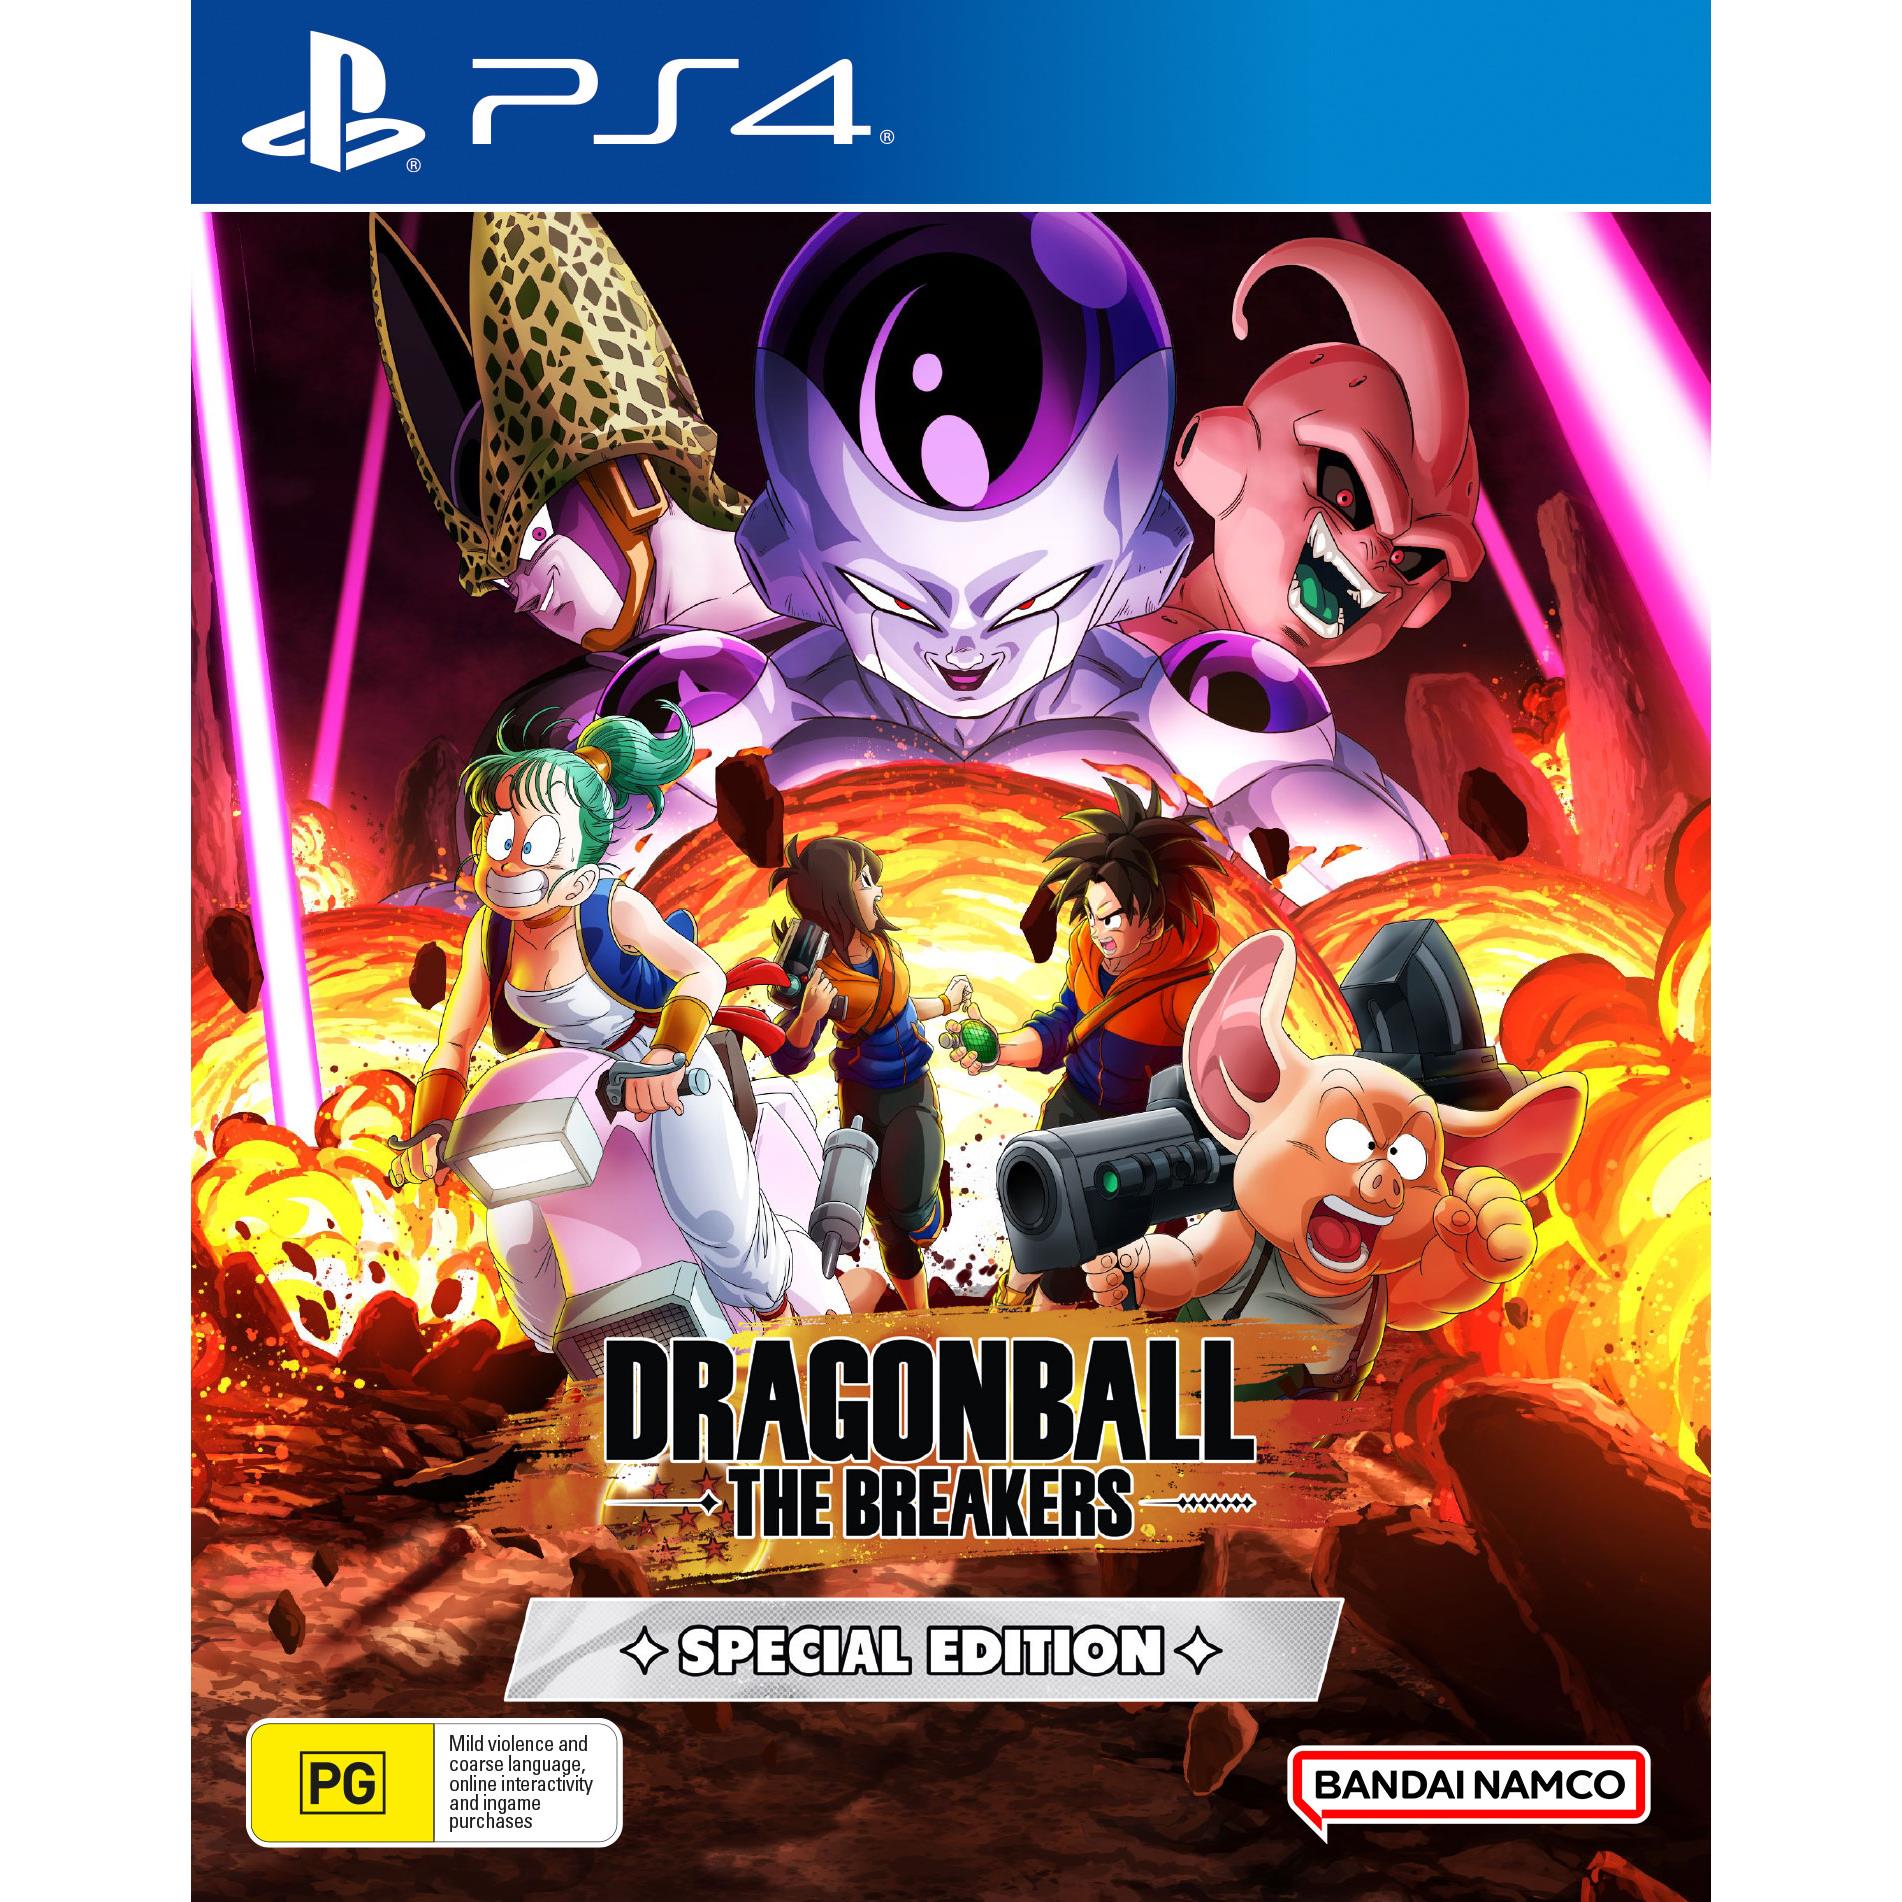 dragon ball: the breakers special edition